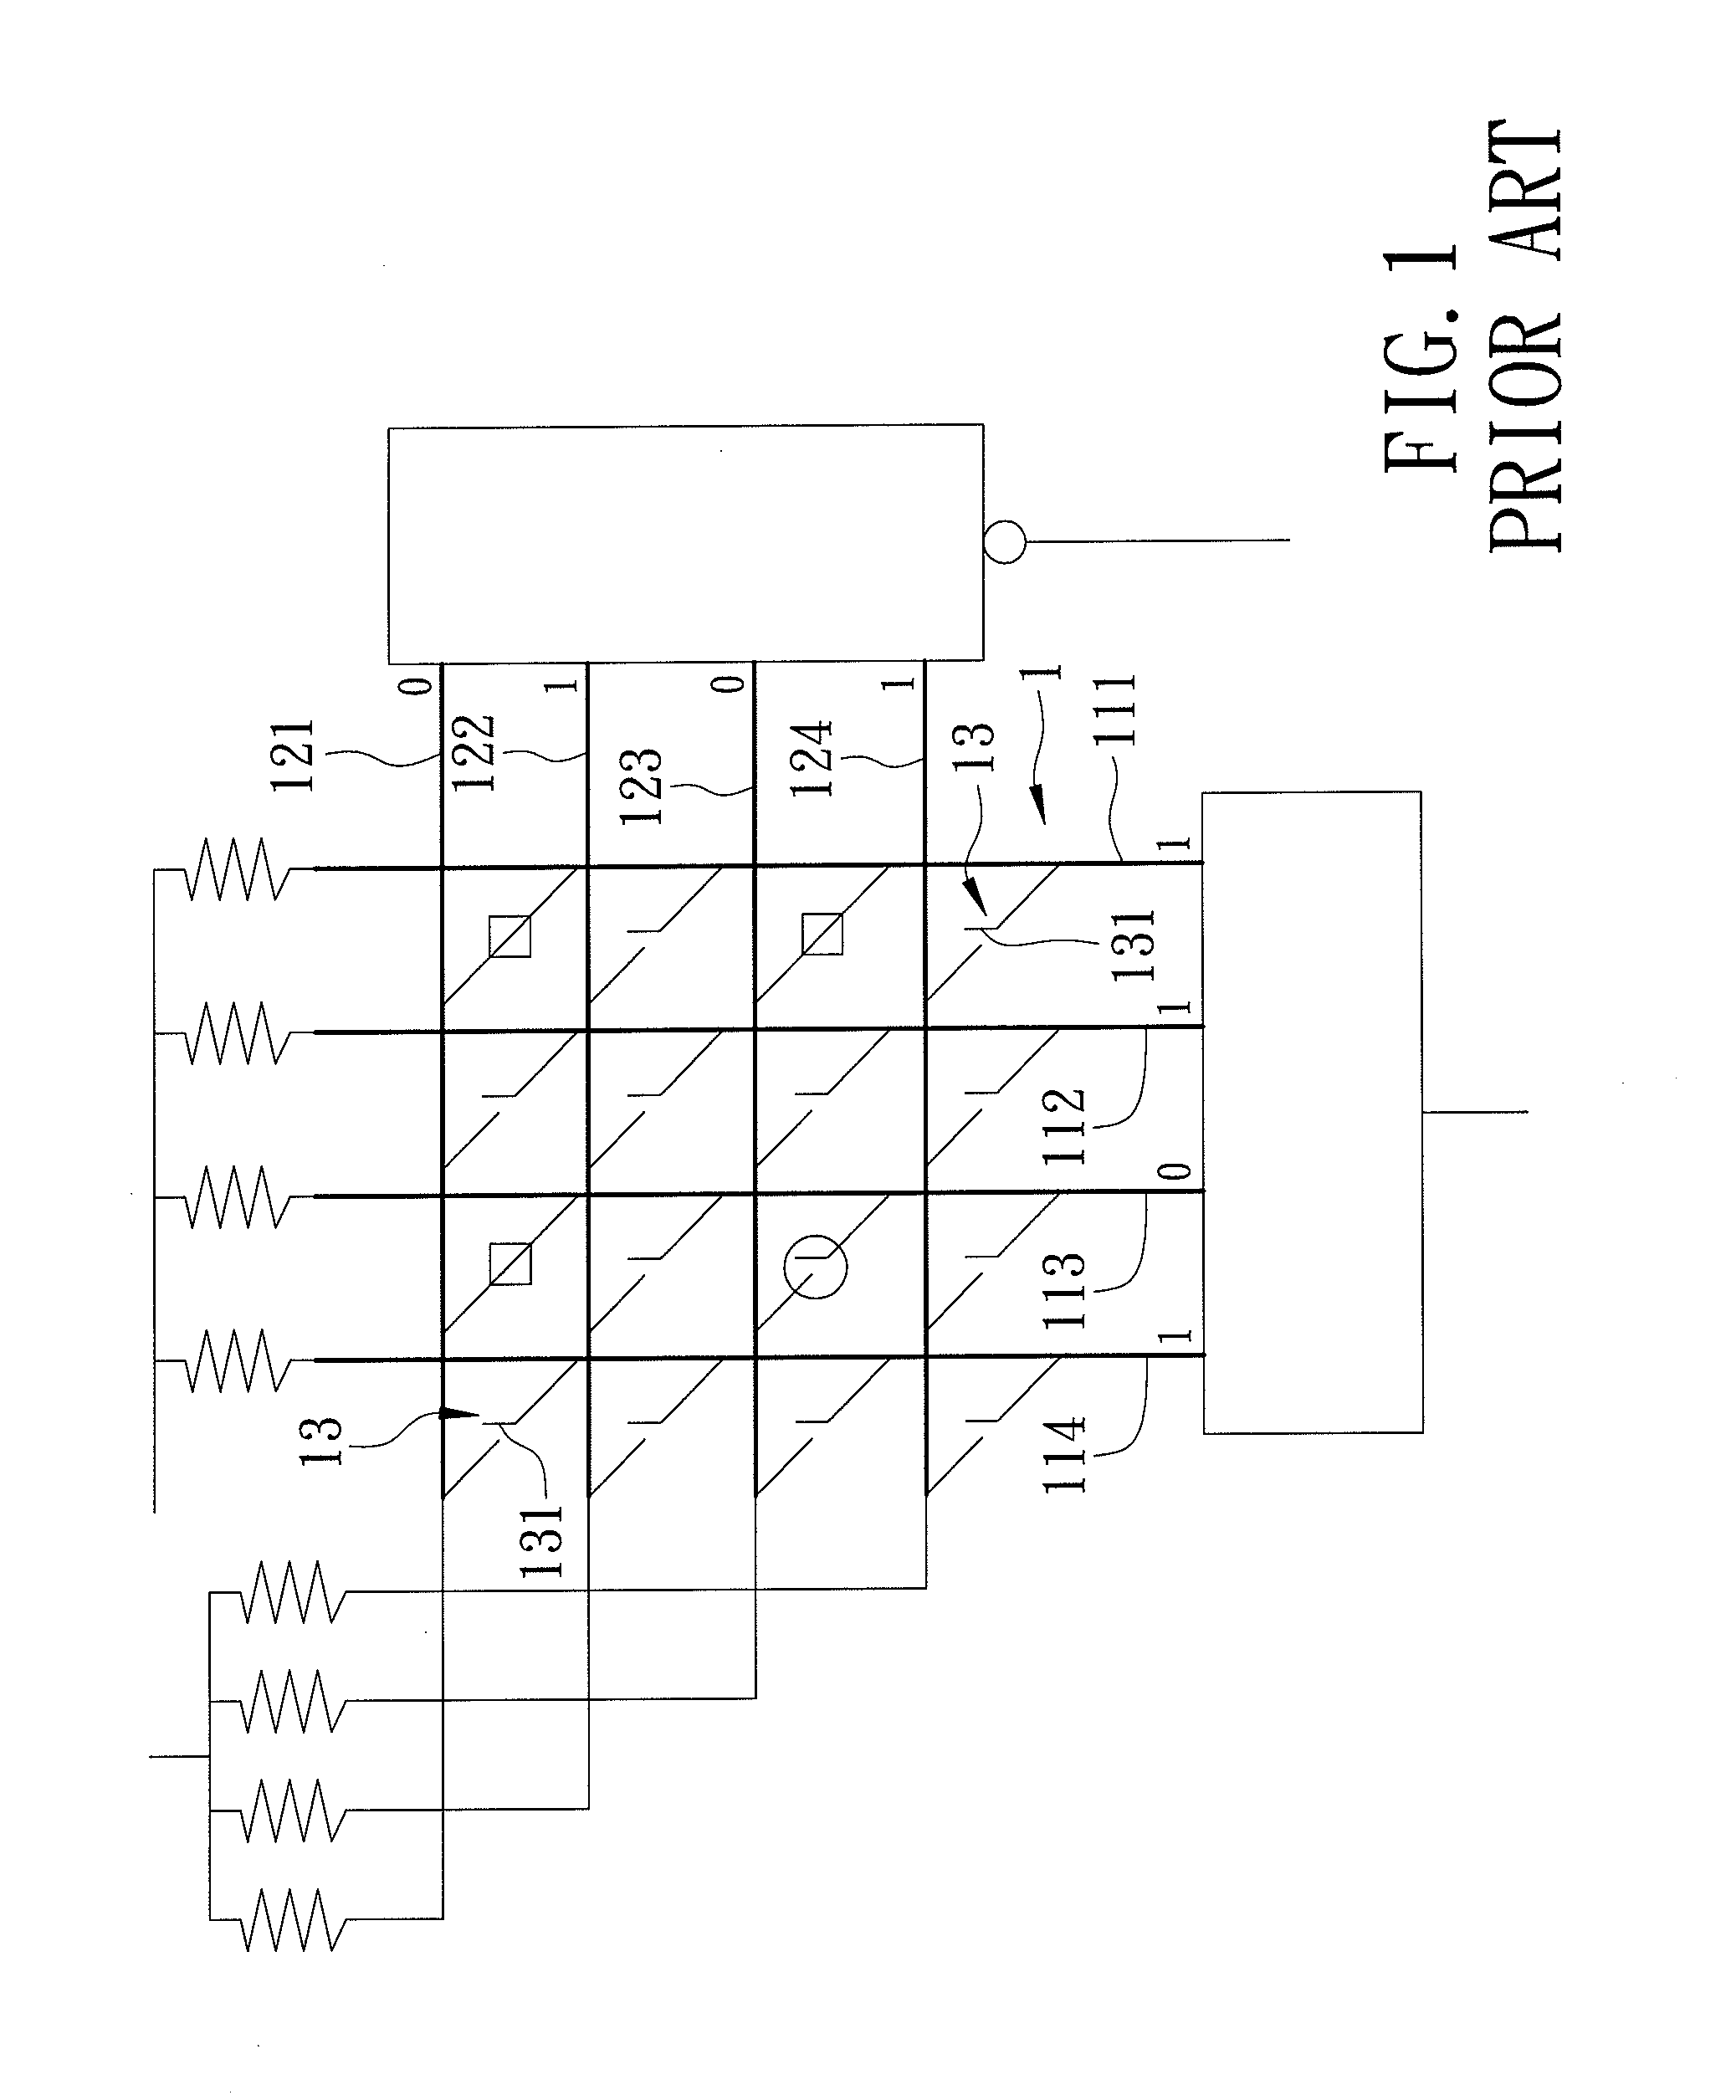 Input device with ghost key suppression